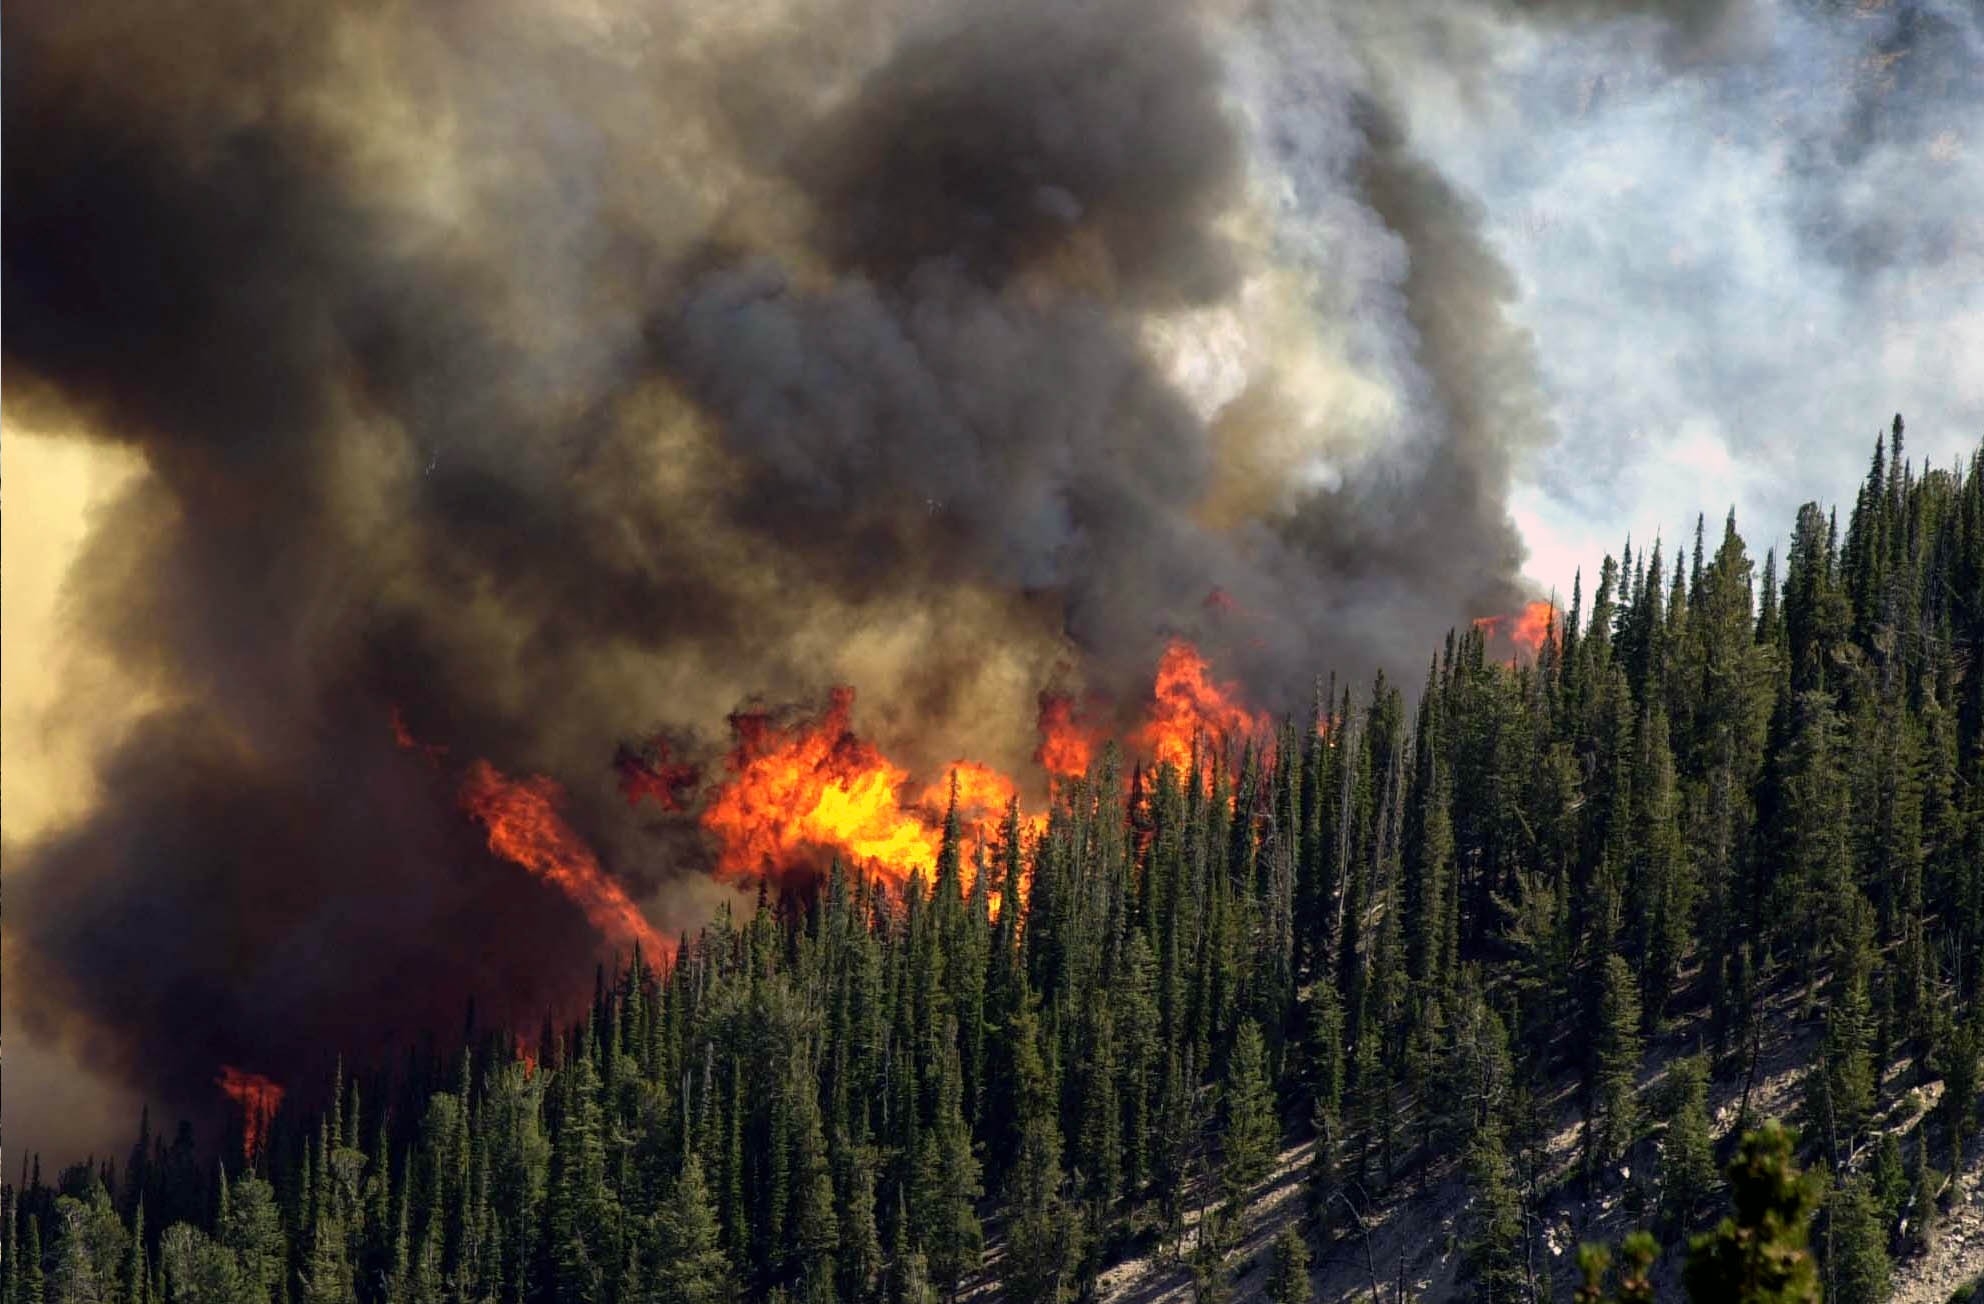 Humans are responsible for the vast majority of wildfires in the U.S.